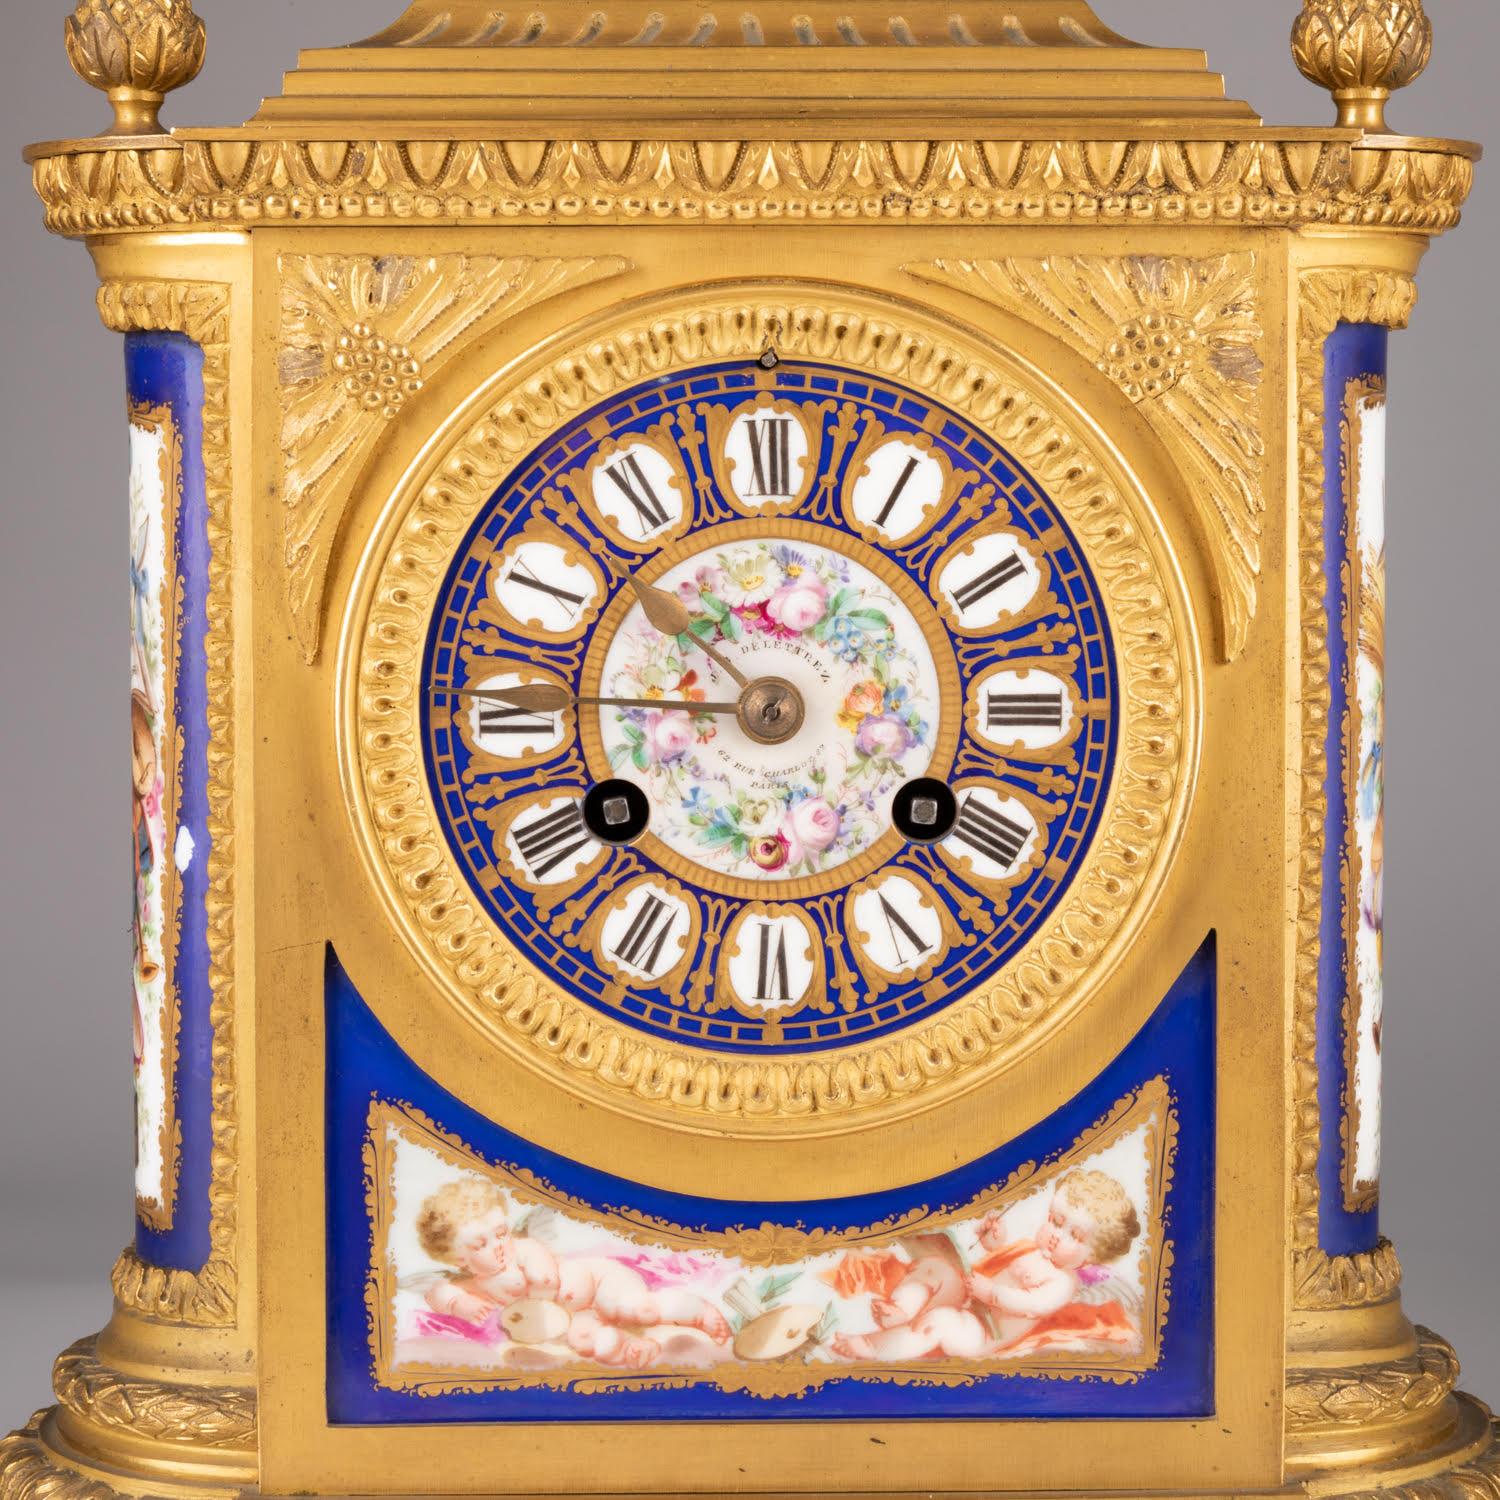 19th century mantel set by Delettrez, Napoleon III period.

Gilt bronze and painted porcelain mantel set, porcelain dial, 19th century, Napoleon III period by Delettrez, simple overhaul of the movement required.    
Clock: h: 37cm, w: 26cm, d: